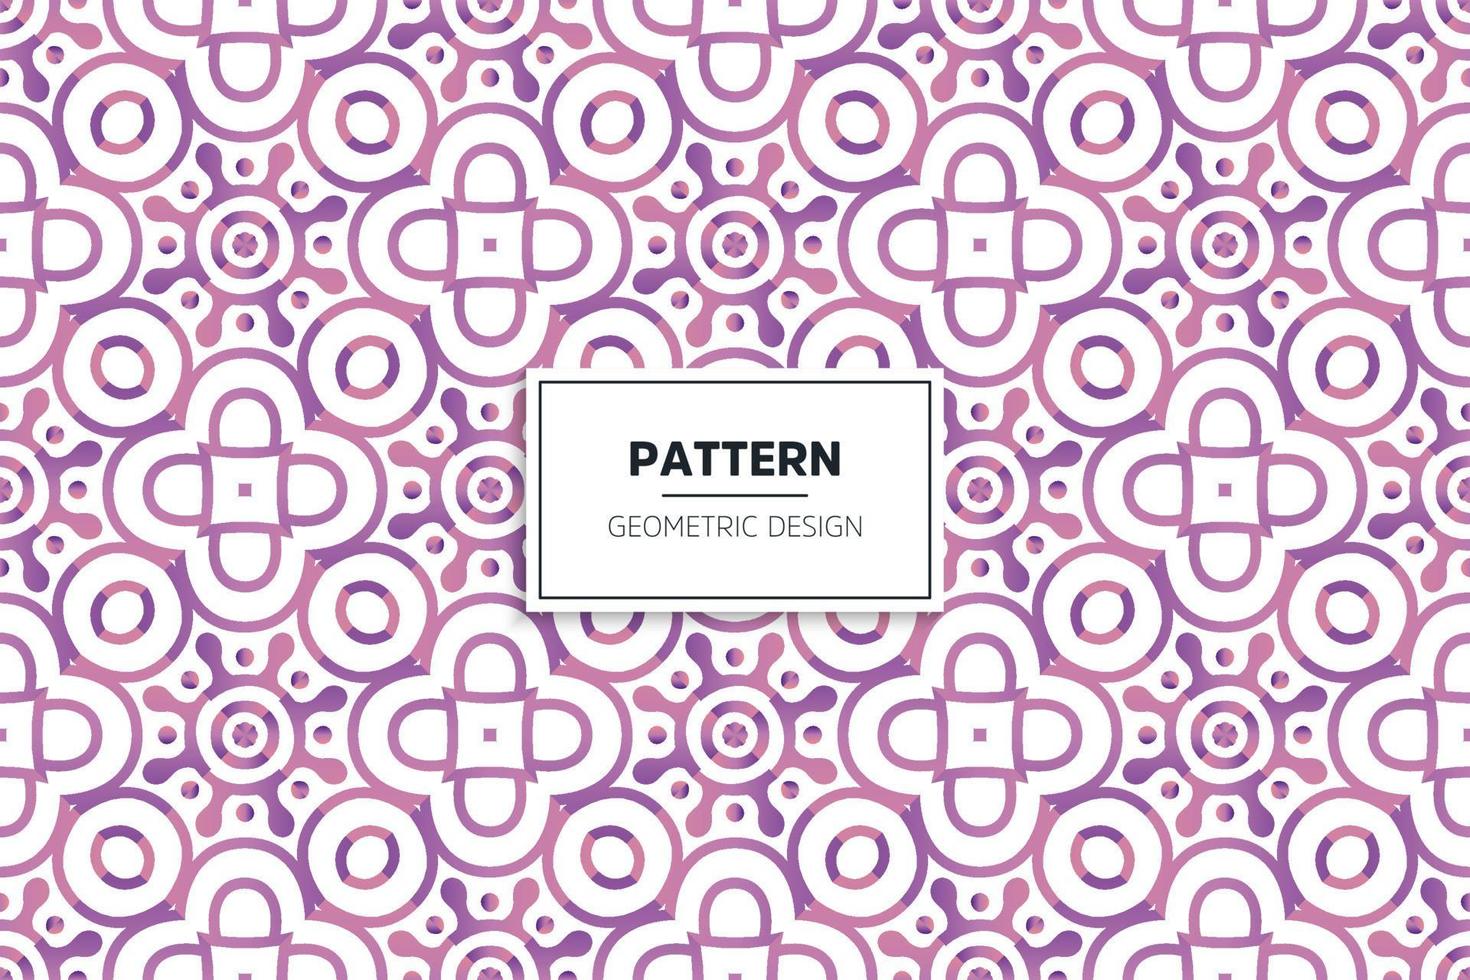 colorful seamless pattern design ornament vector